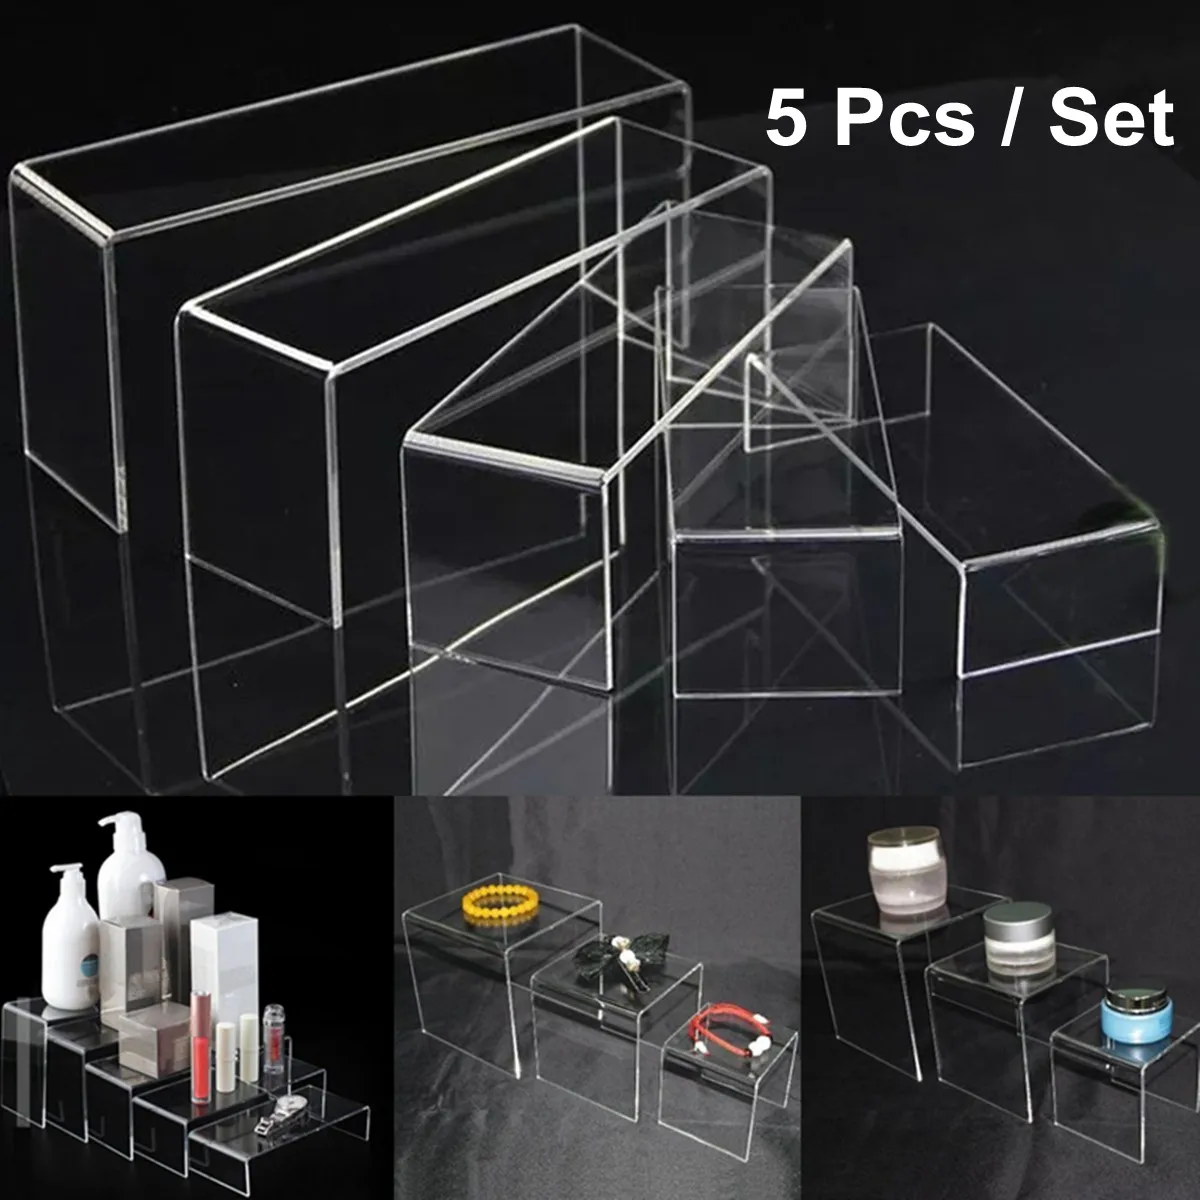 5Pcs Set Acrylic Clear Perspex Sturdy Jewellery Display Riser Stand Showcase y 